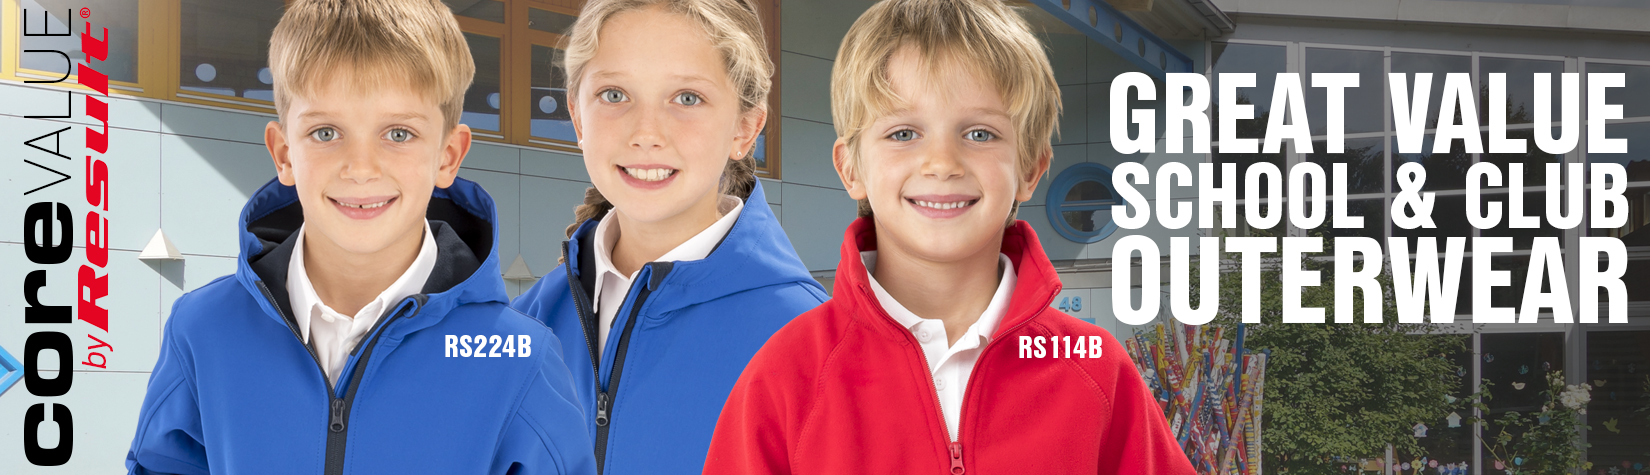 Great value kids' outerwear by Result 